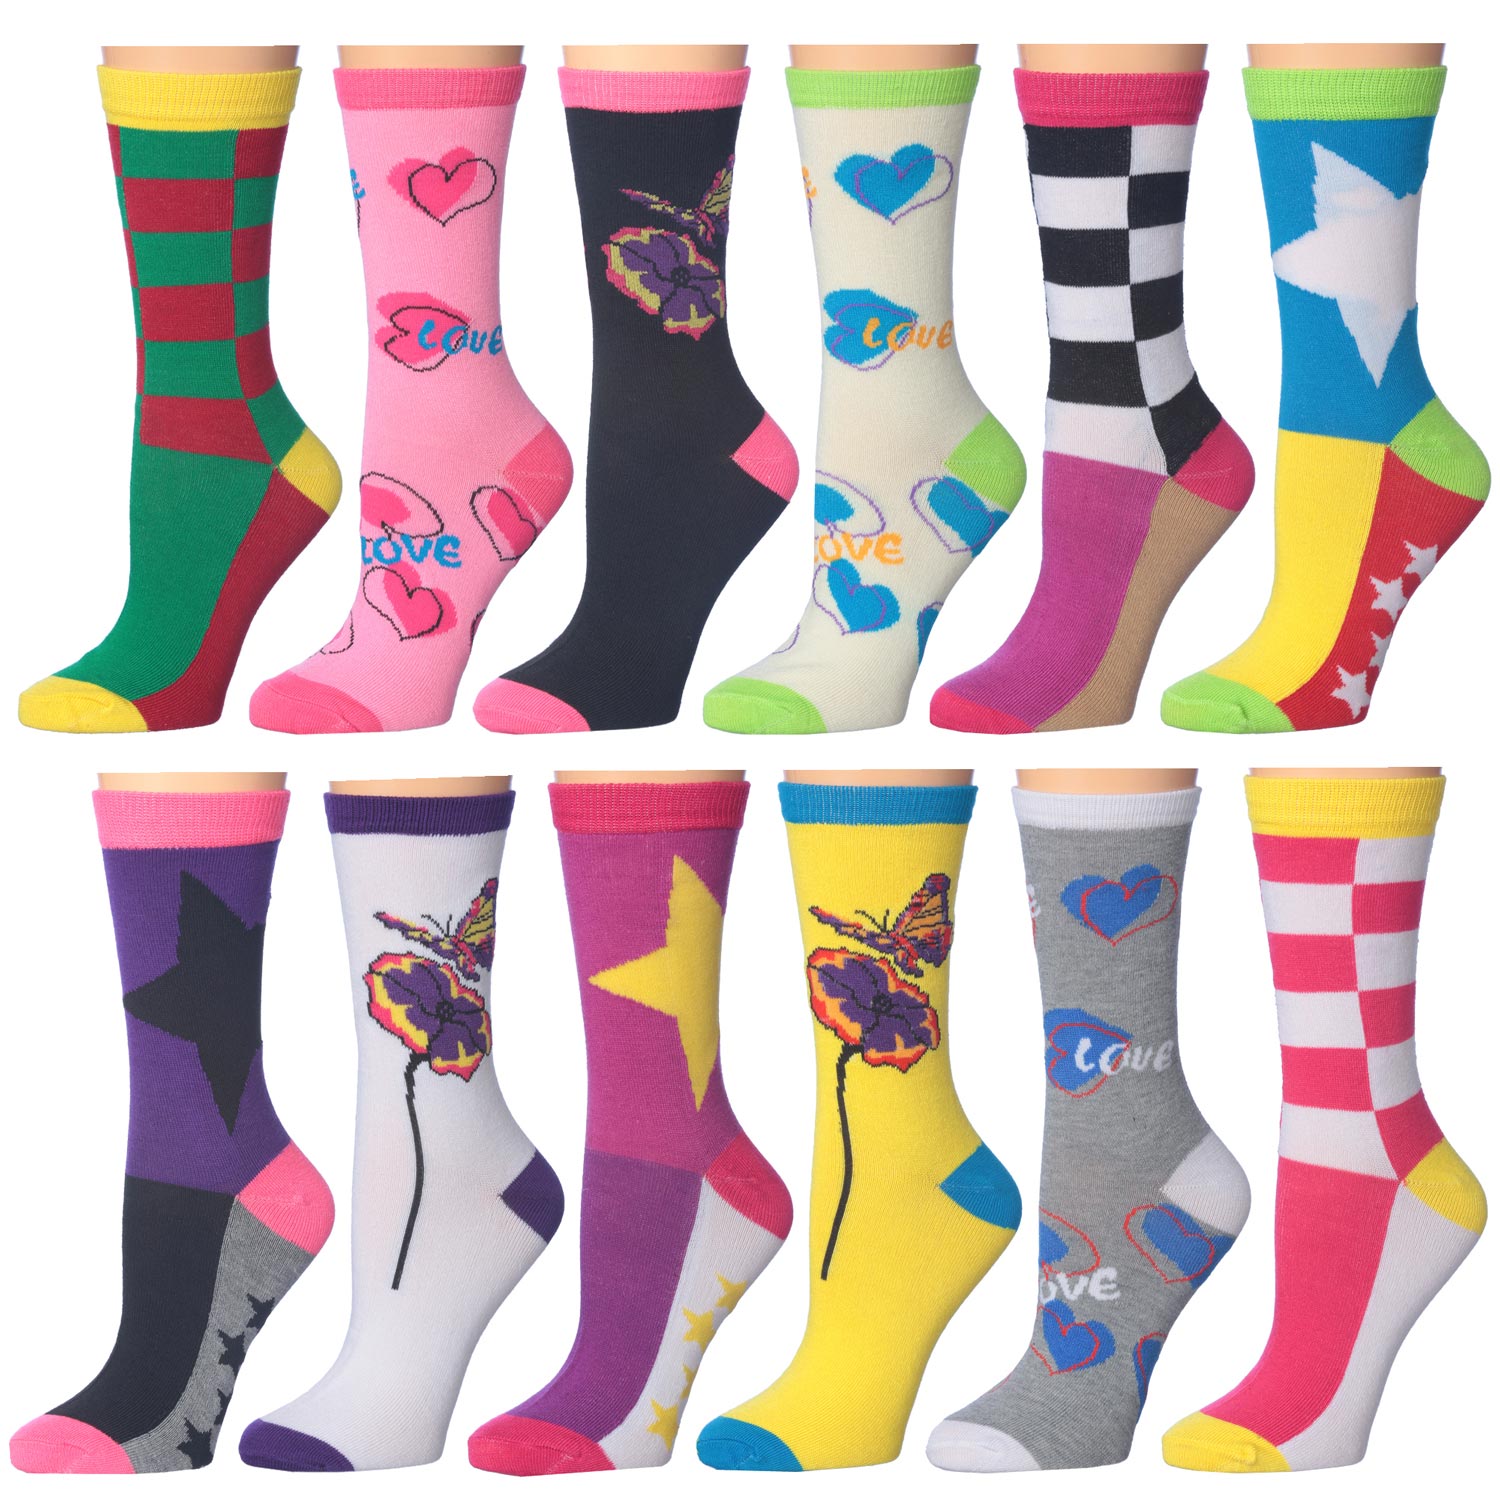 12 Pack Socks Set Frenchic Women's Colorful Cotton-Blend Patterned - $15.99